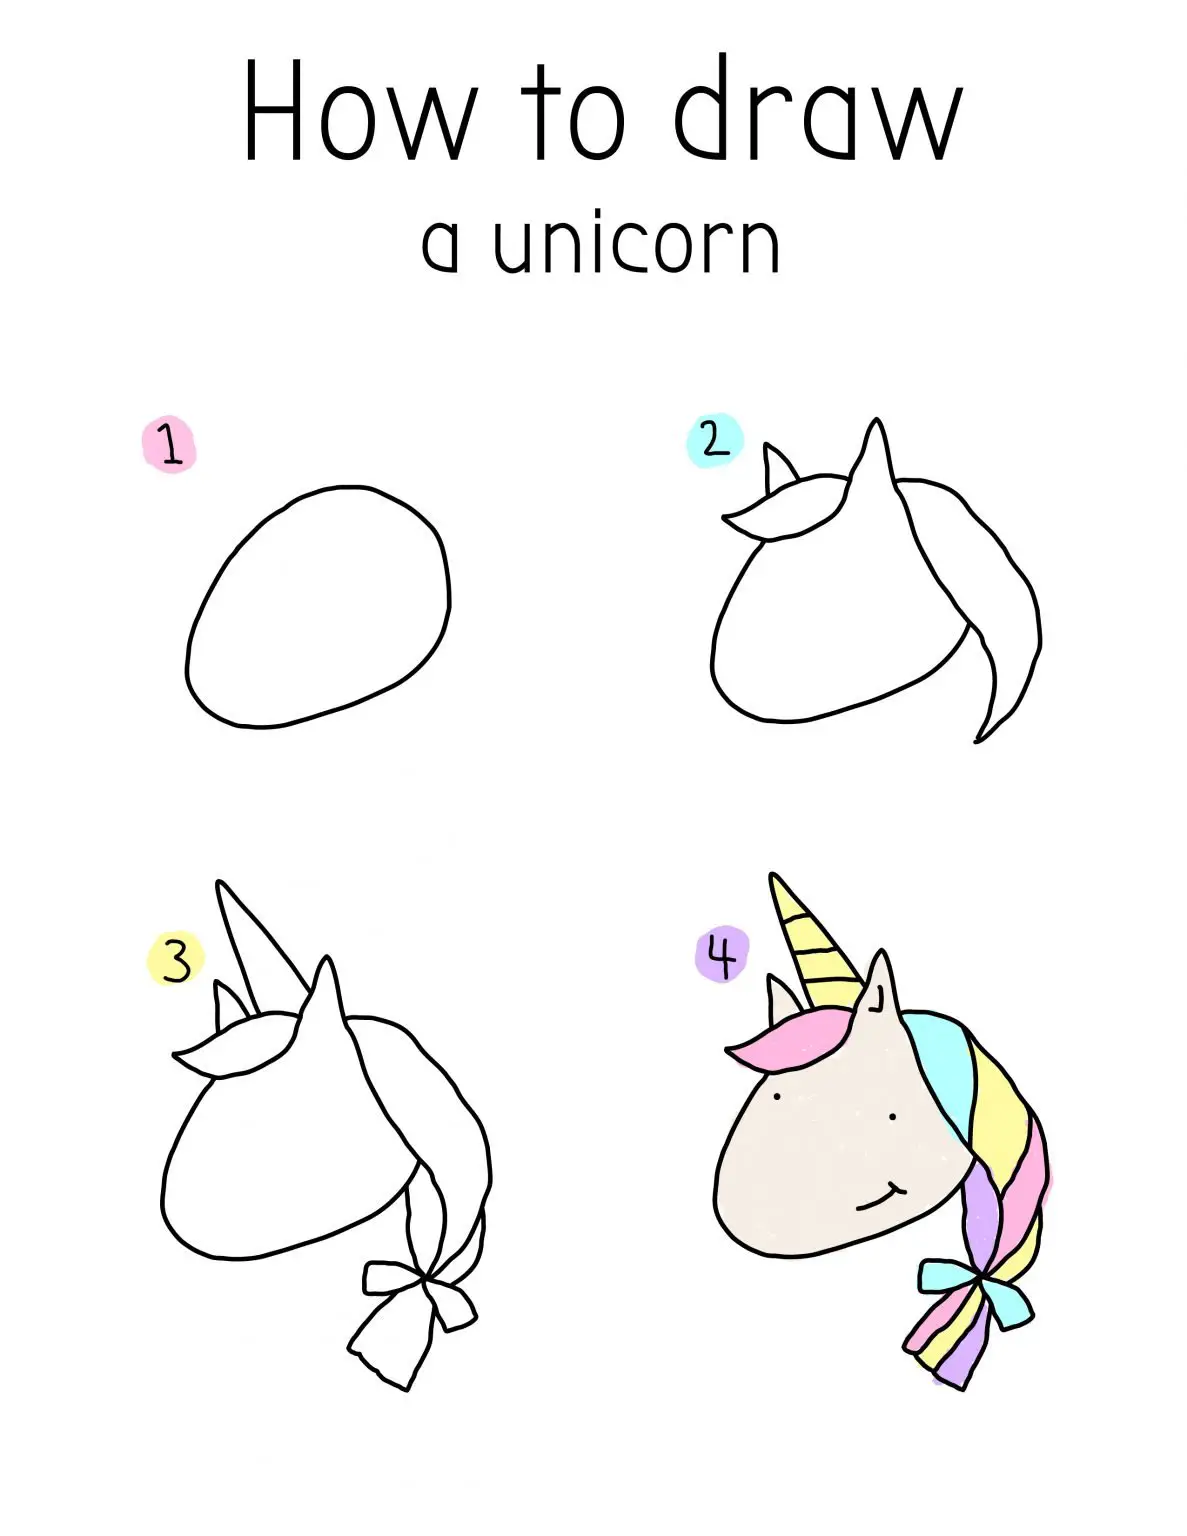 How To Draw a Simple Unicorn (Step by Step for Kids) + 15 Cool 🦄 Facts